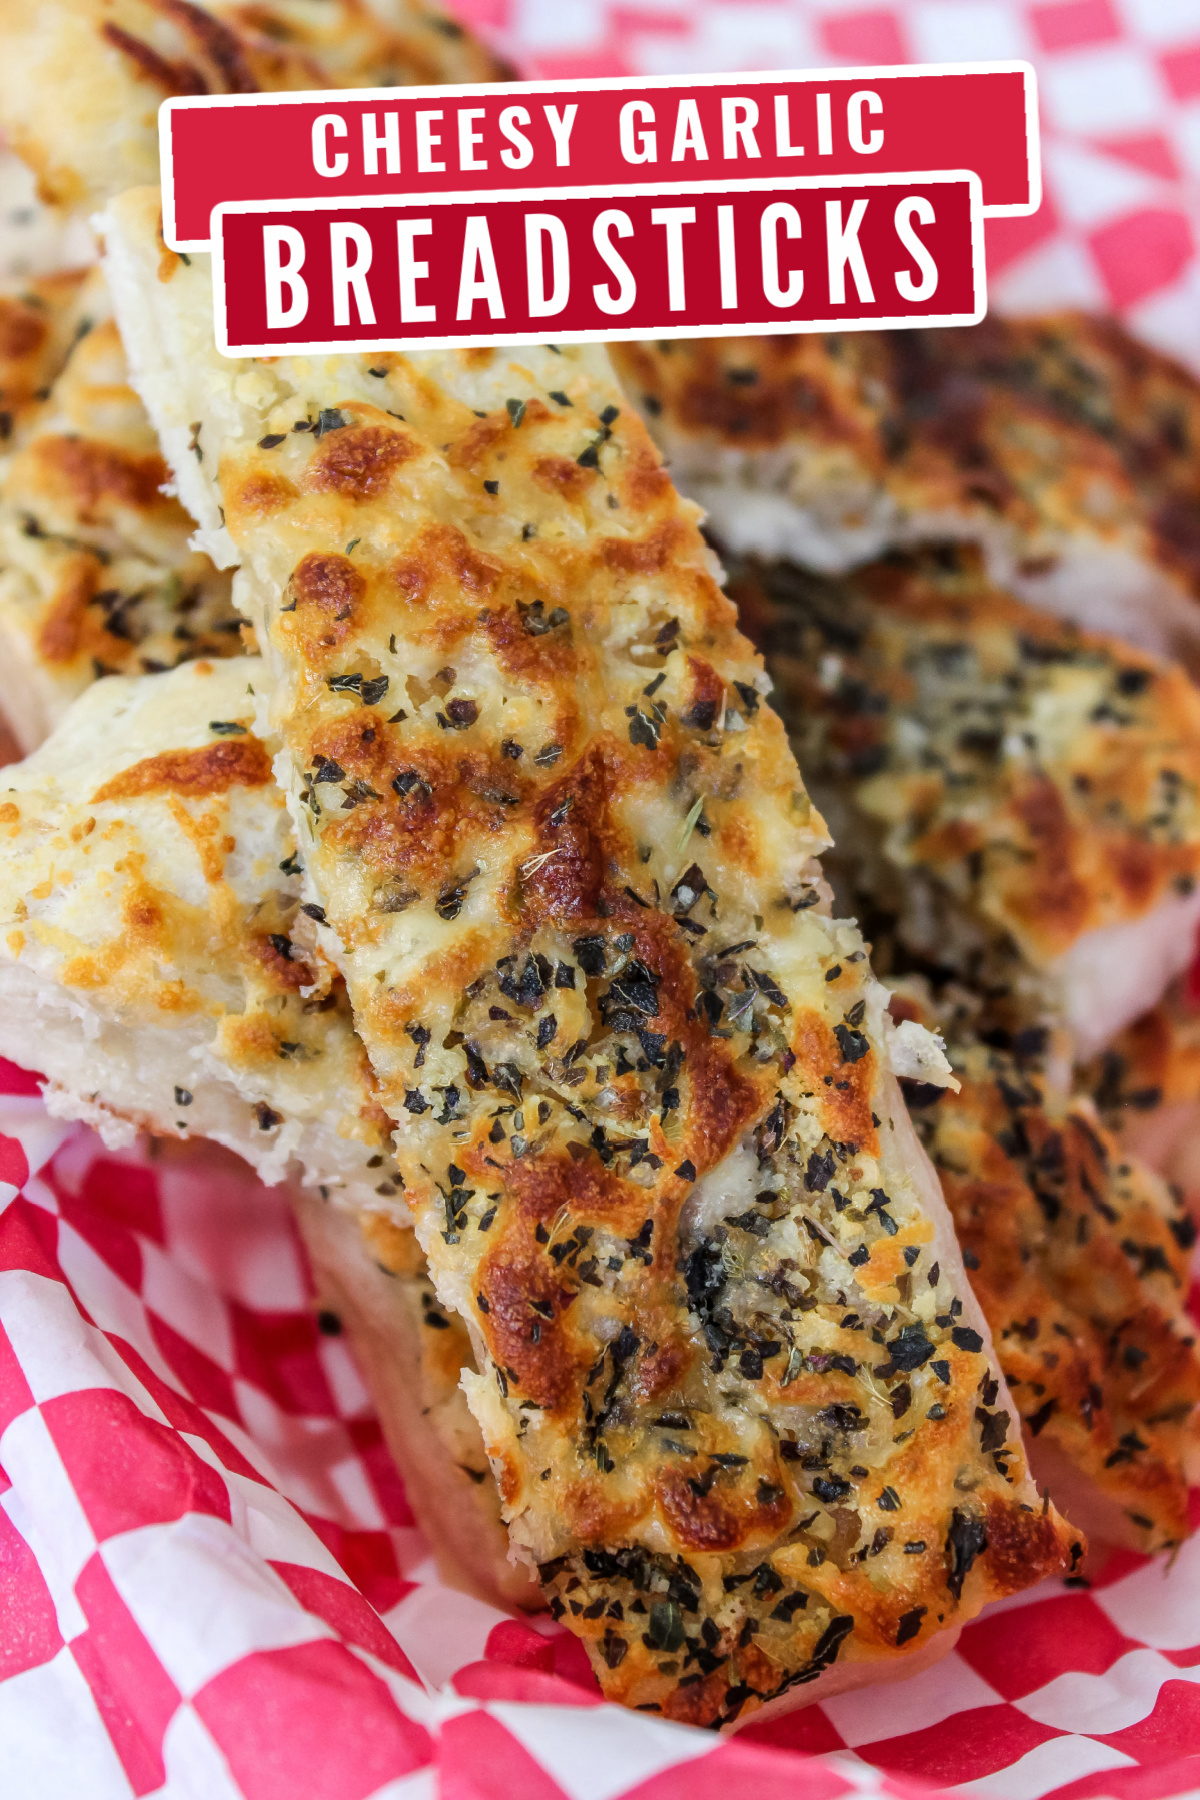 These cheesy garlic breadsticks are made from pizza dough for a delicious twist on the classic! It's a hit as a side dish or appetizer.